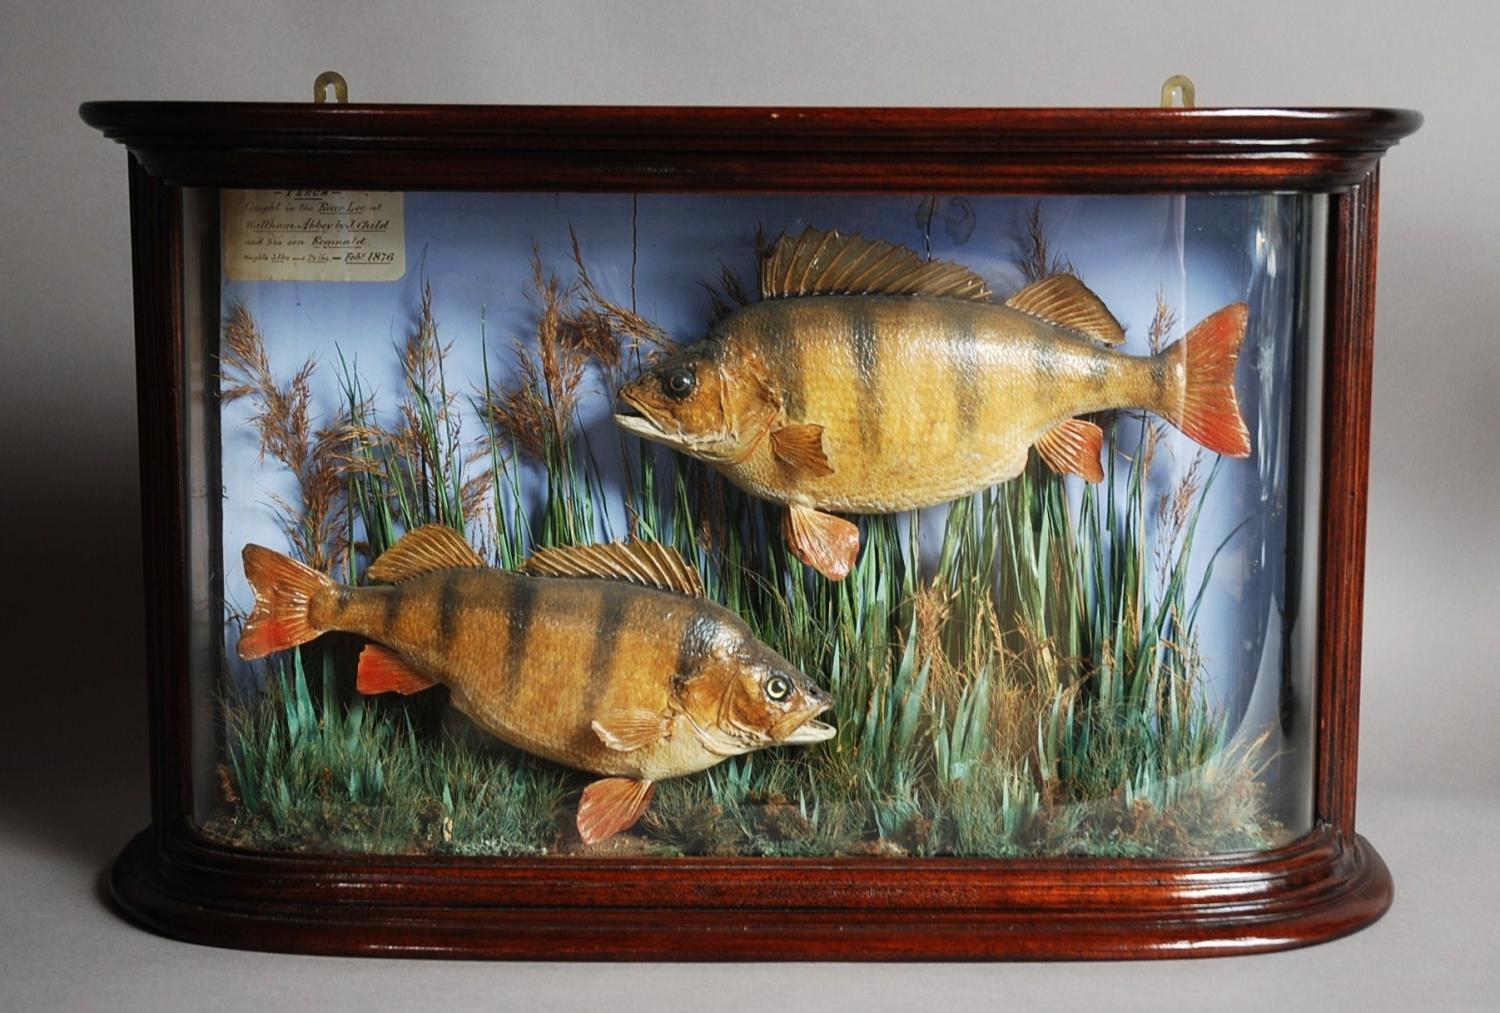 Mid/Late 19th century taxidermy pair of perch